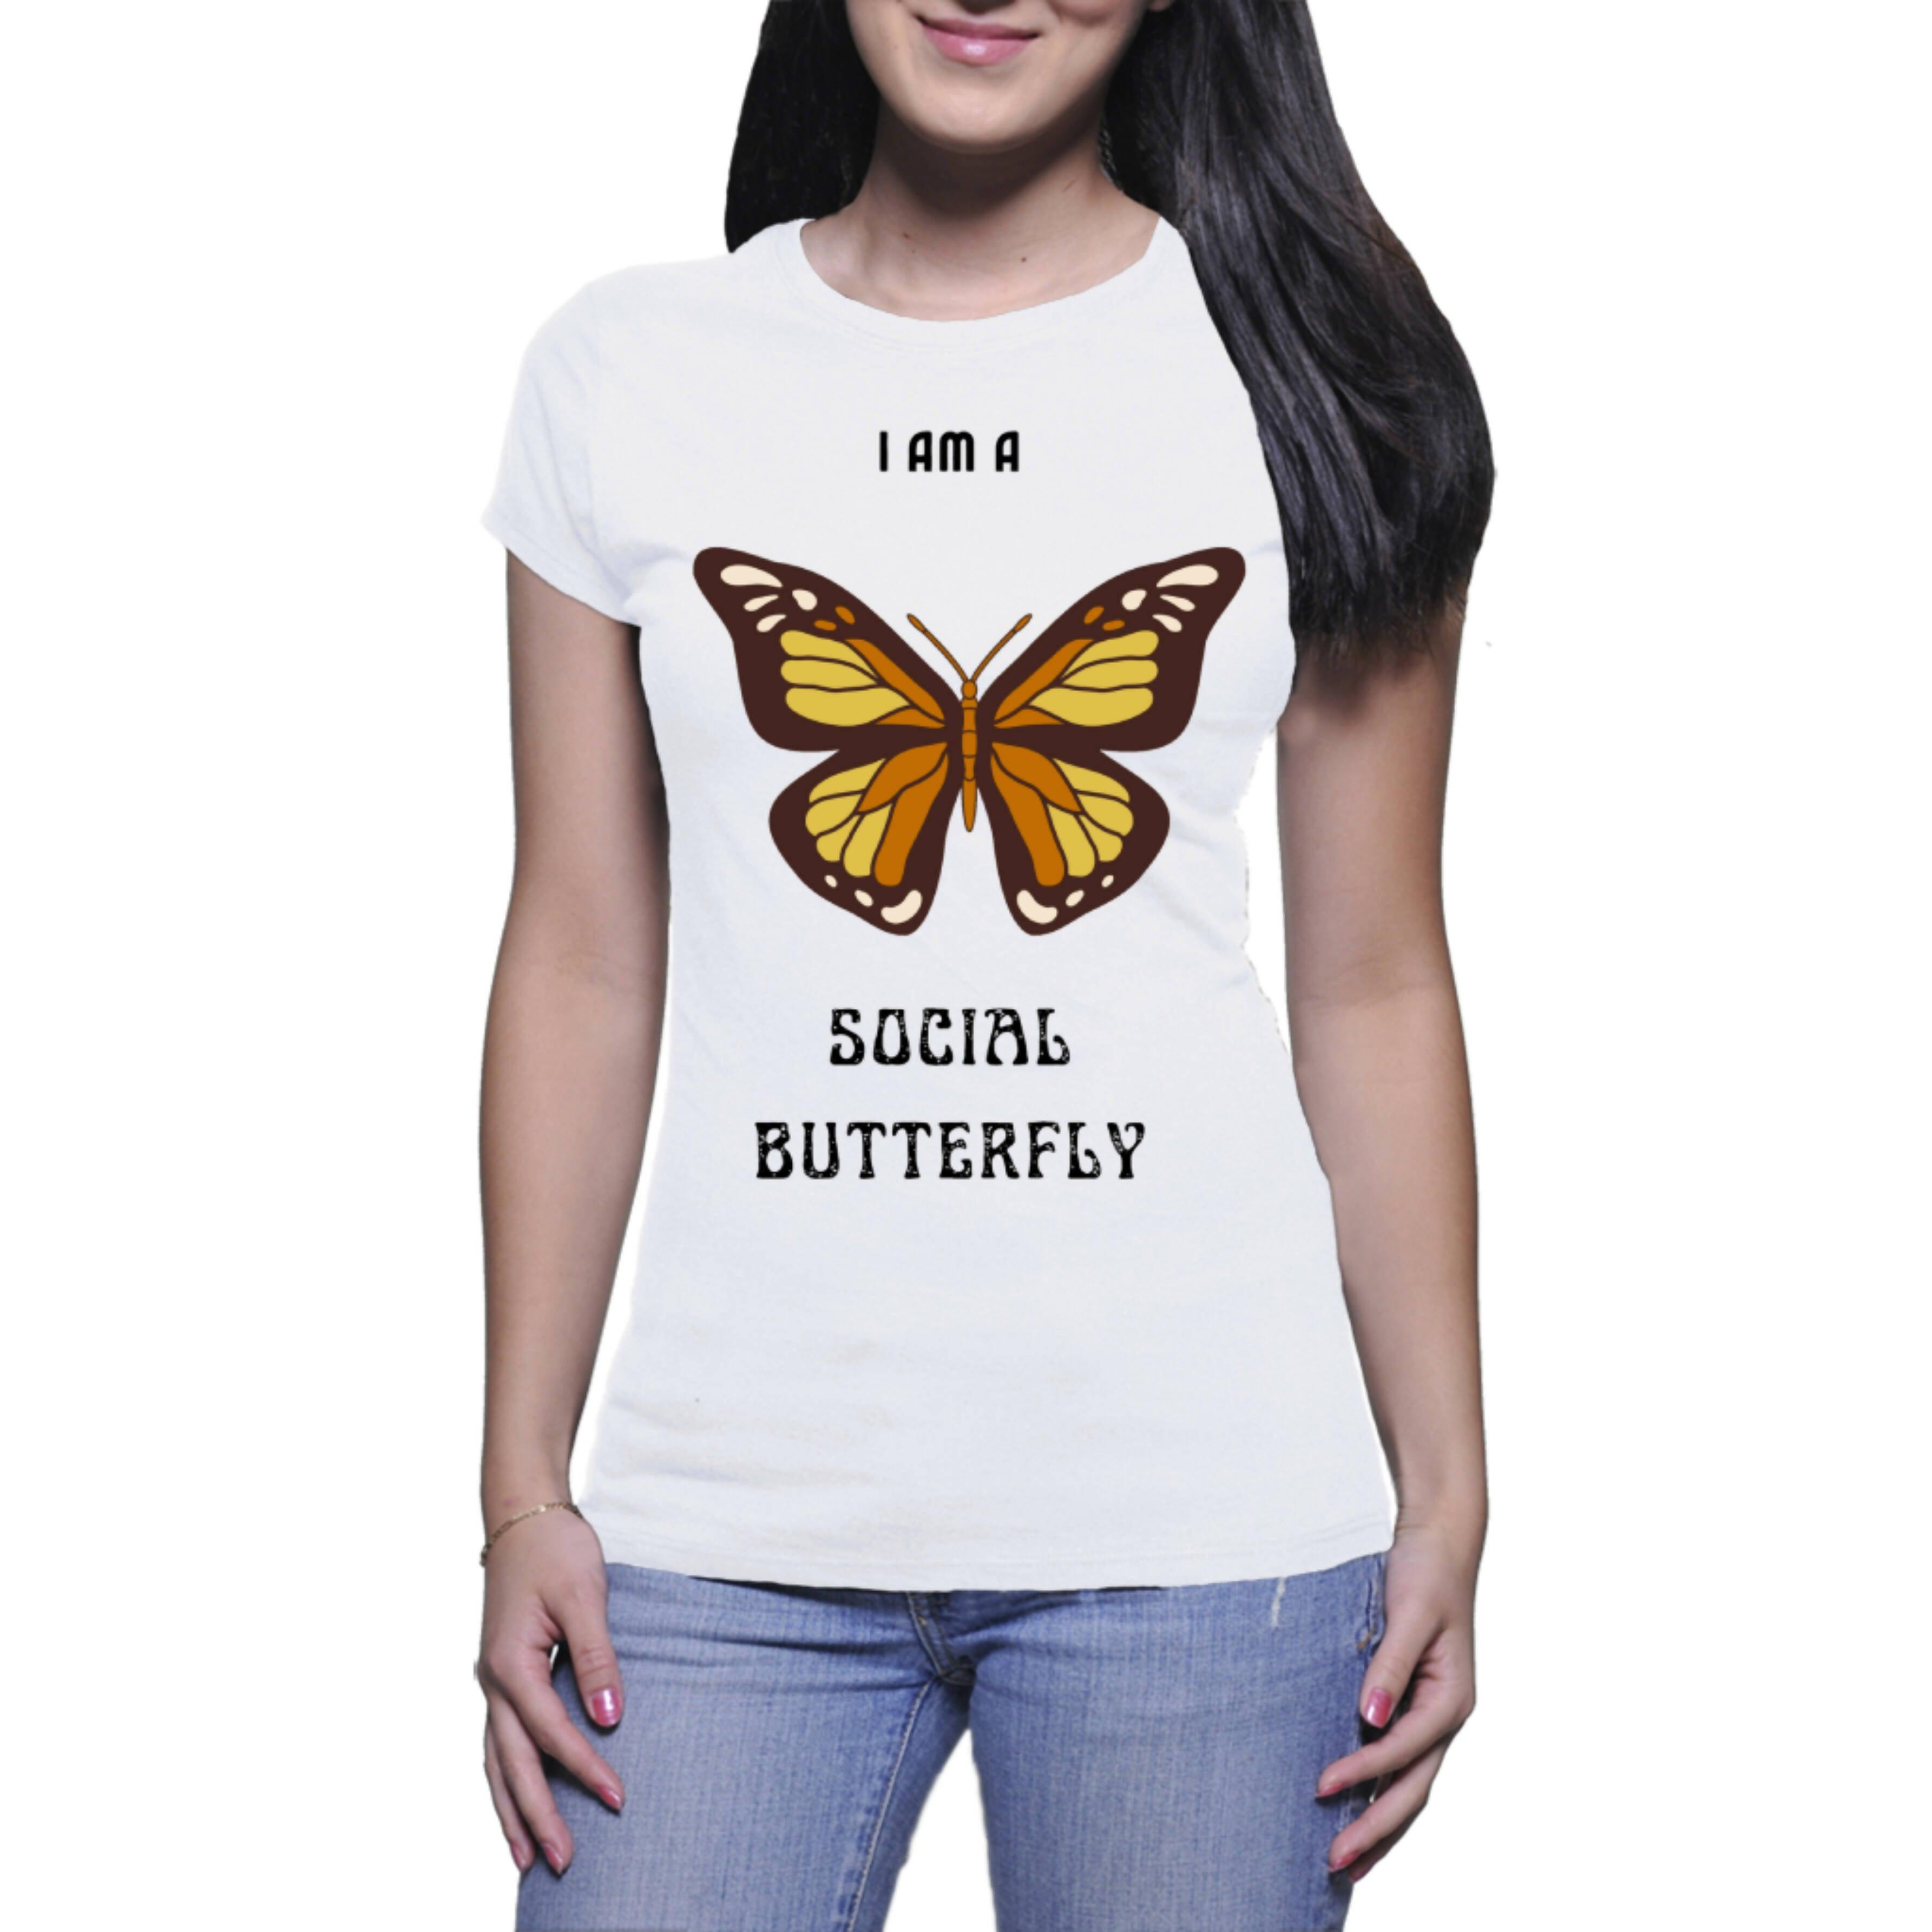 Social Butterfly - Ladies T-shirts (Clothes Minded Art)